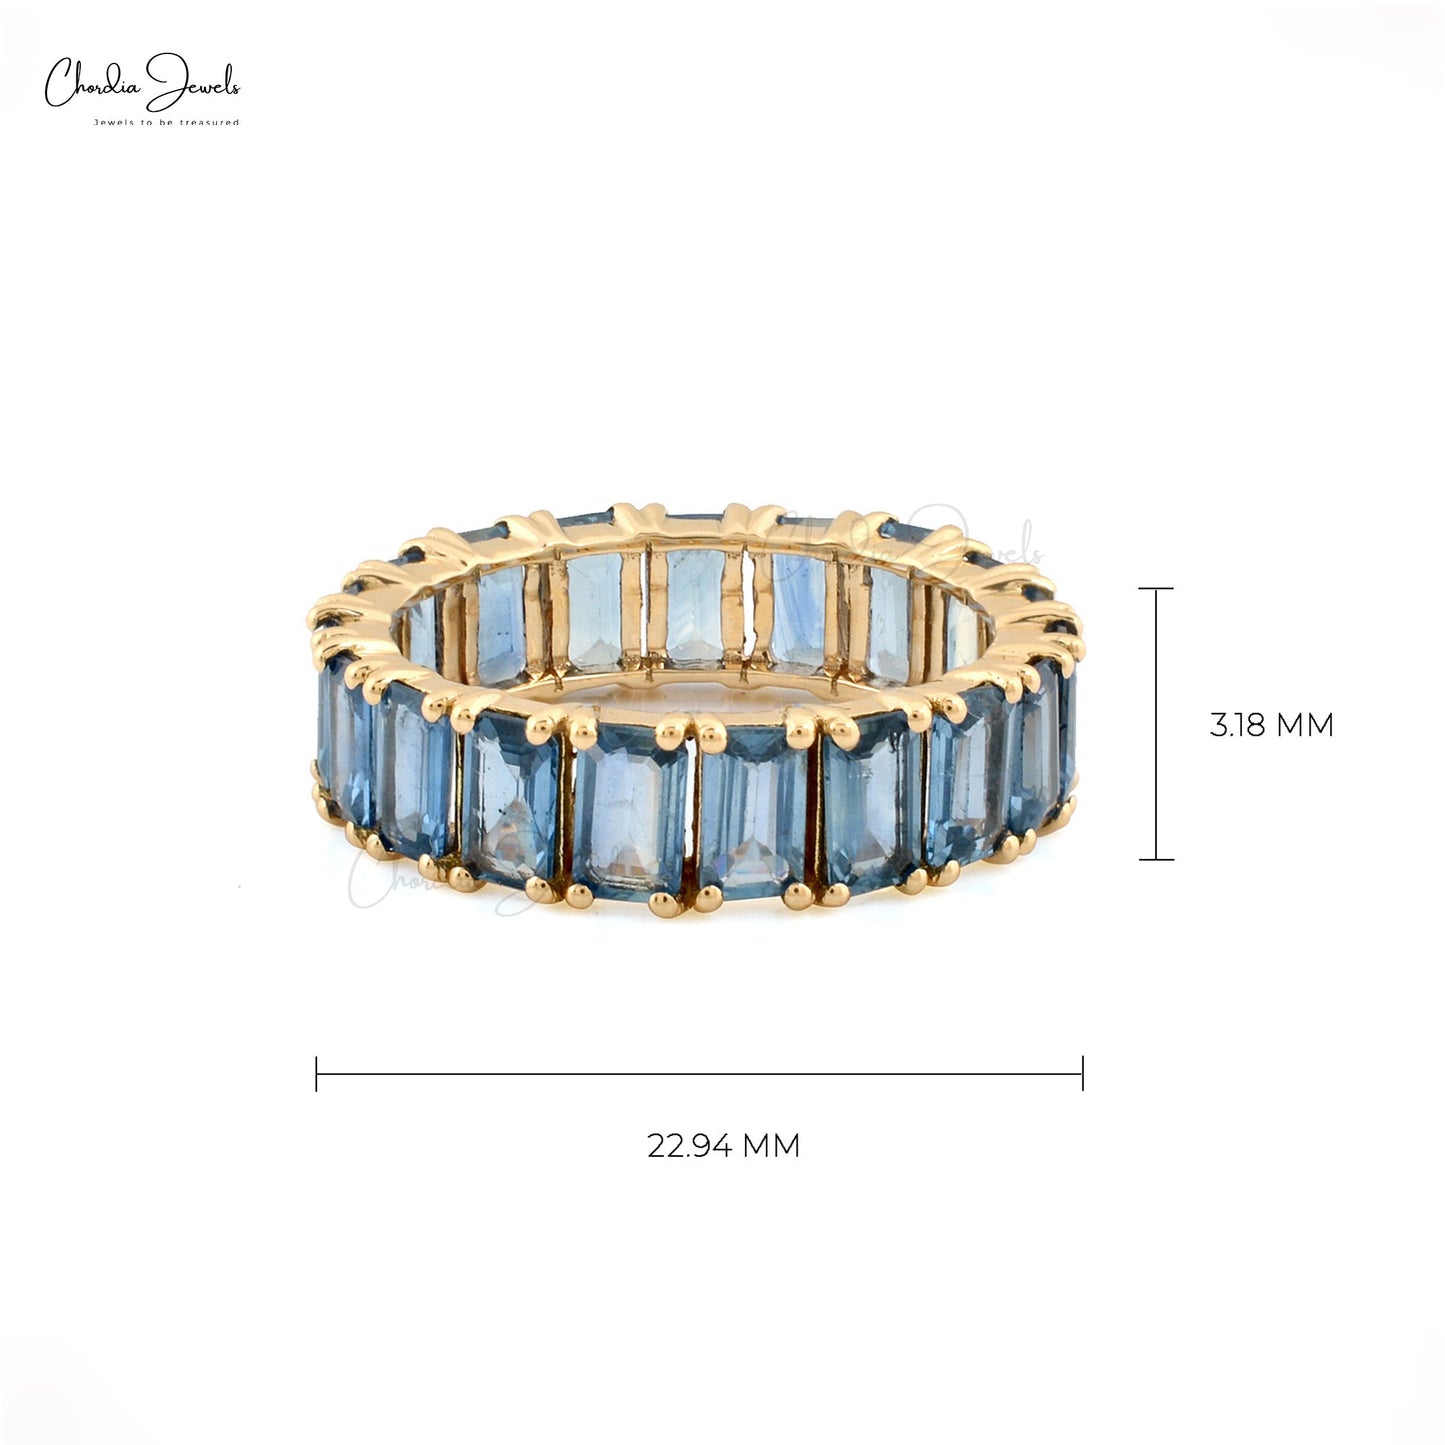 Emerald Cut 5x3mm Blue Sapphire Eternity Band In 14k Solid Yellow Gold (Size US-6.75)